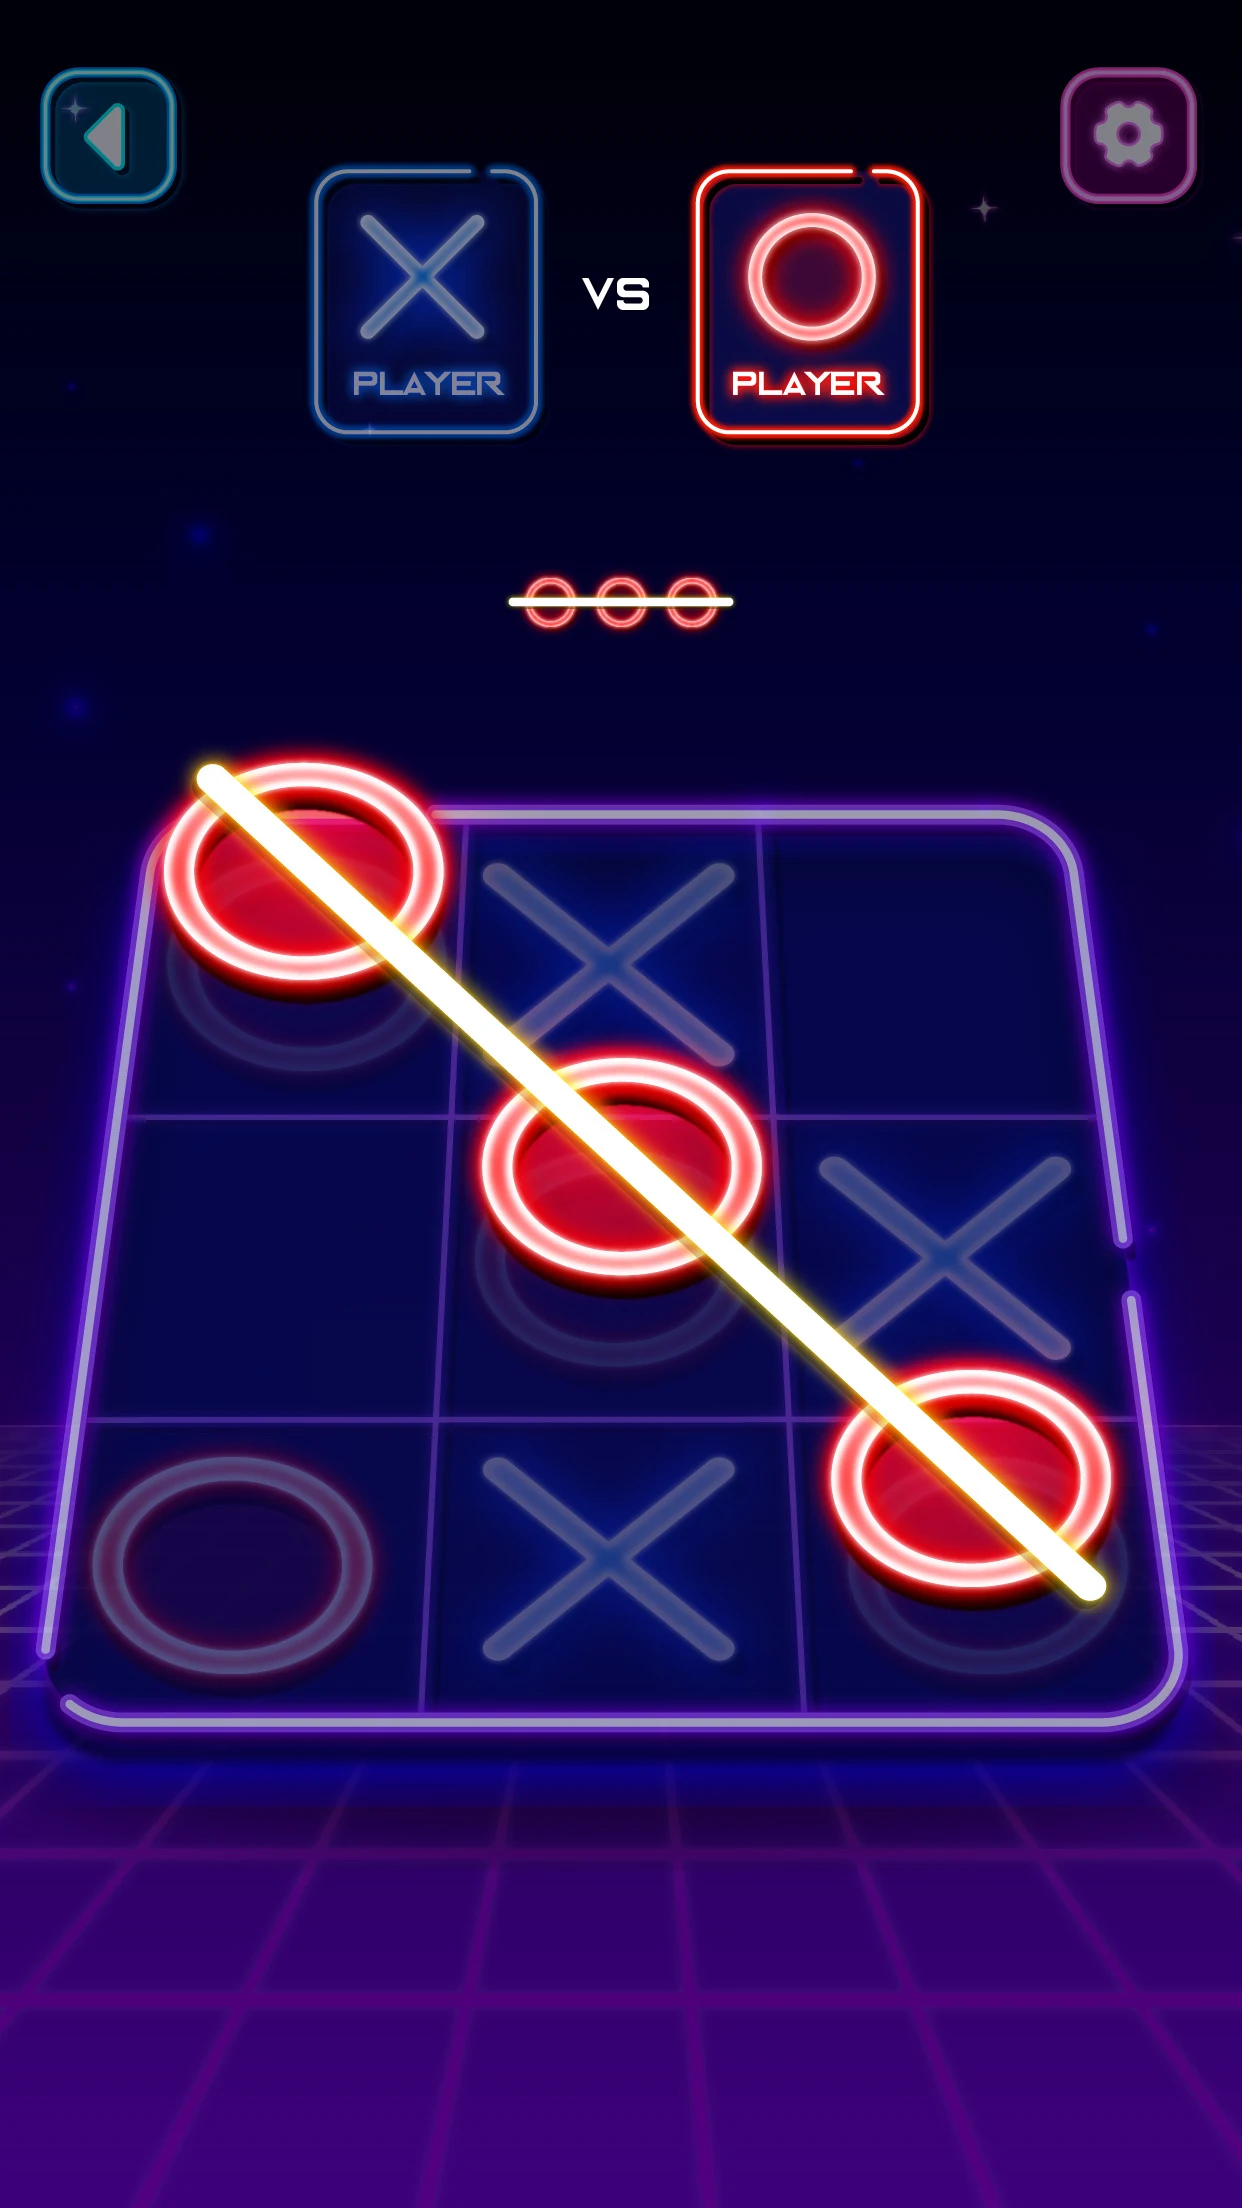 Tic Tac Toe Online Multiplayer Game for Android - Download